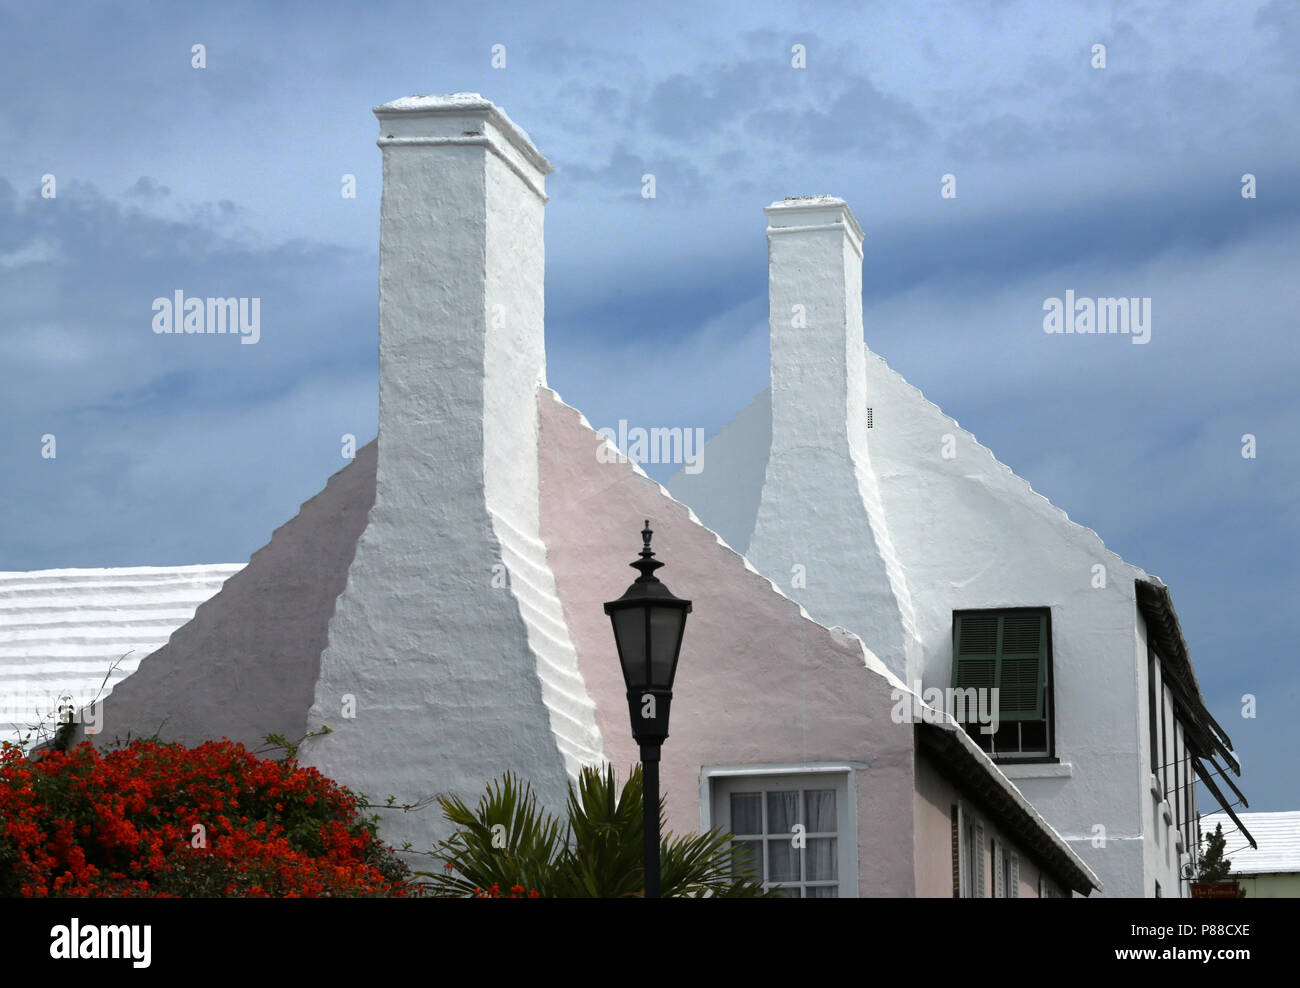 Bermudian architectural style with tall chimneys and steeped roofs Stock Photo